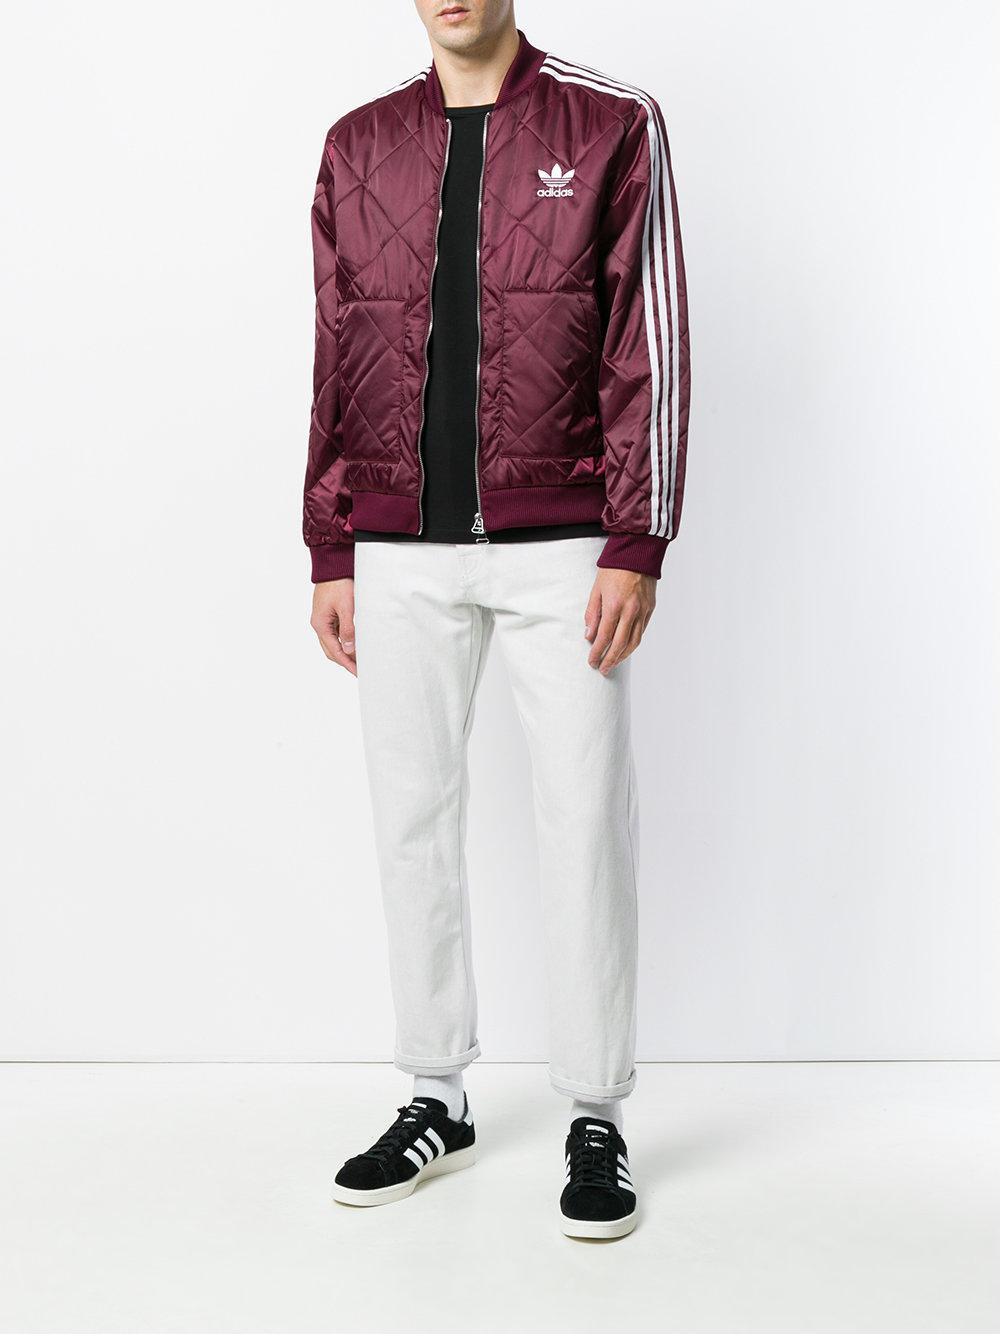 adidas Originals Sst Quilted Pre Jacket in Red for Men - Lyst